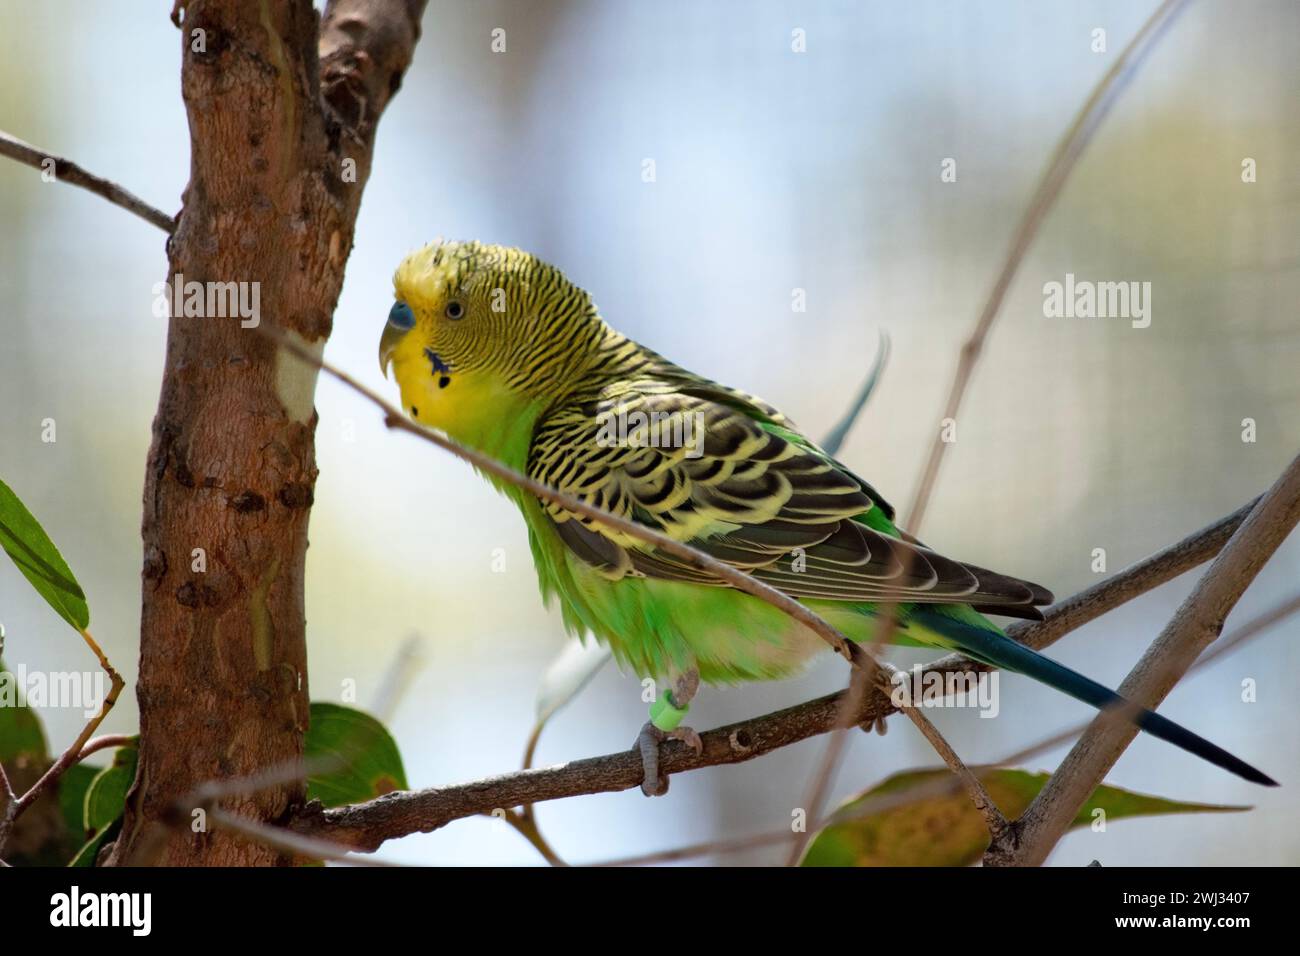 The budgerigar’s plumage is bright yellow and green, with a blue cheek and black scalloping on its wing feathers. Its tail is slender and dark blue. Stock Photo